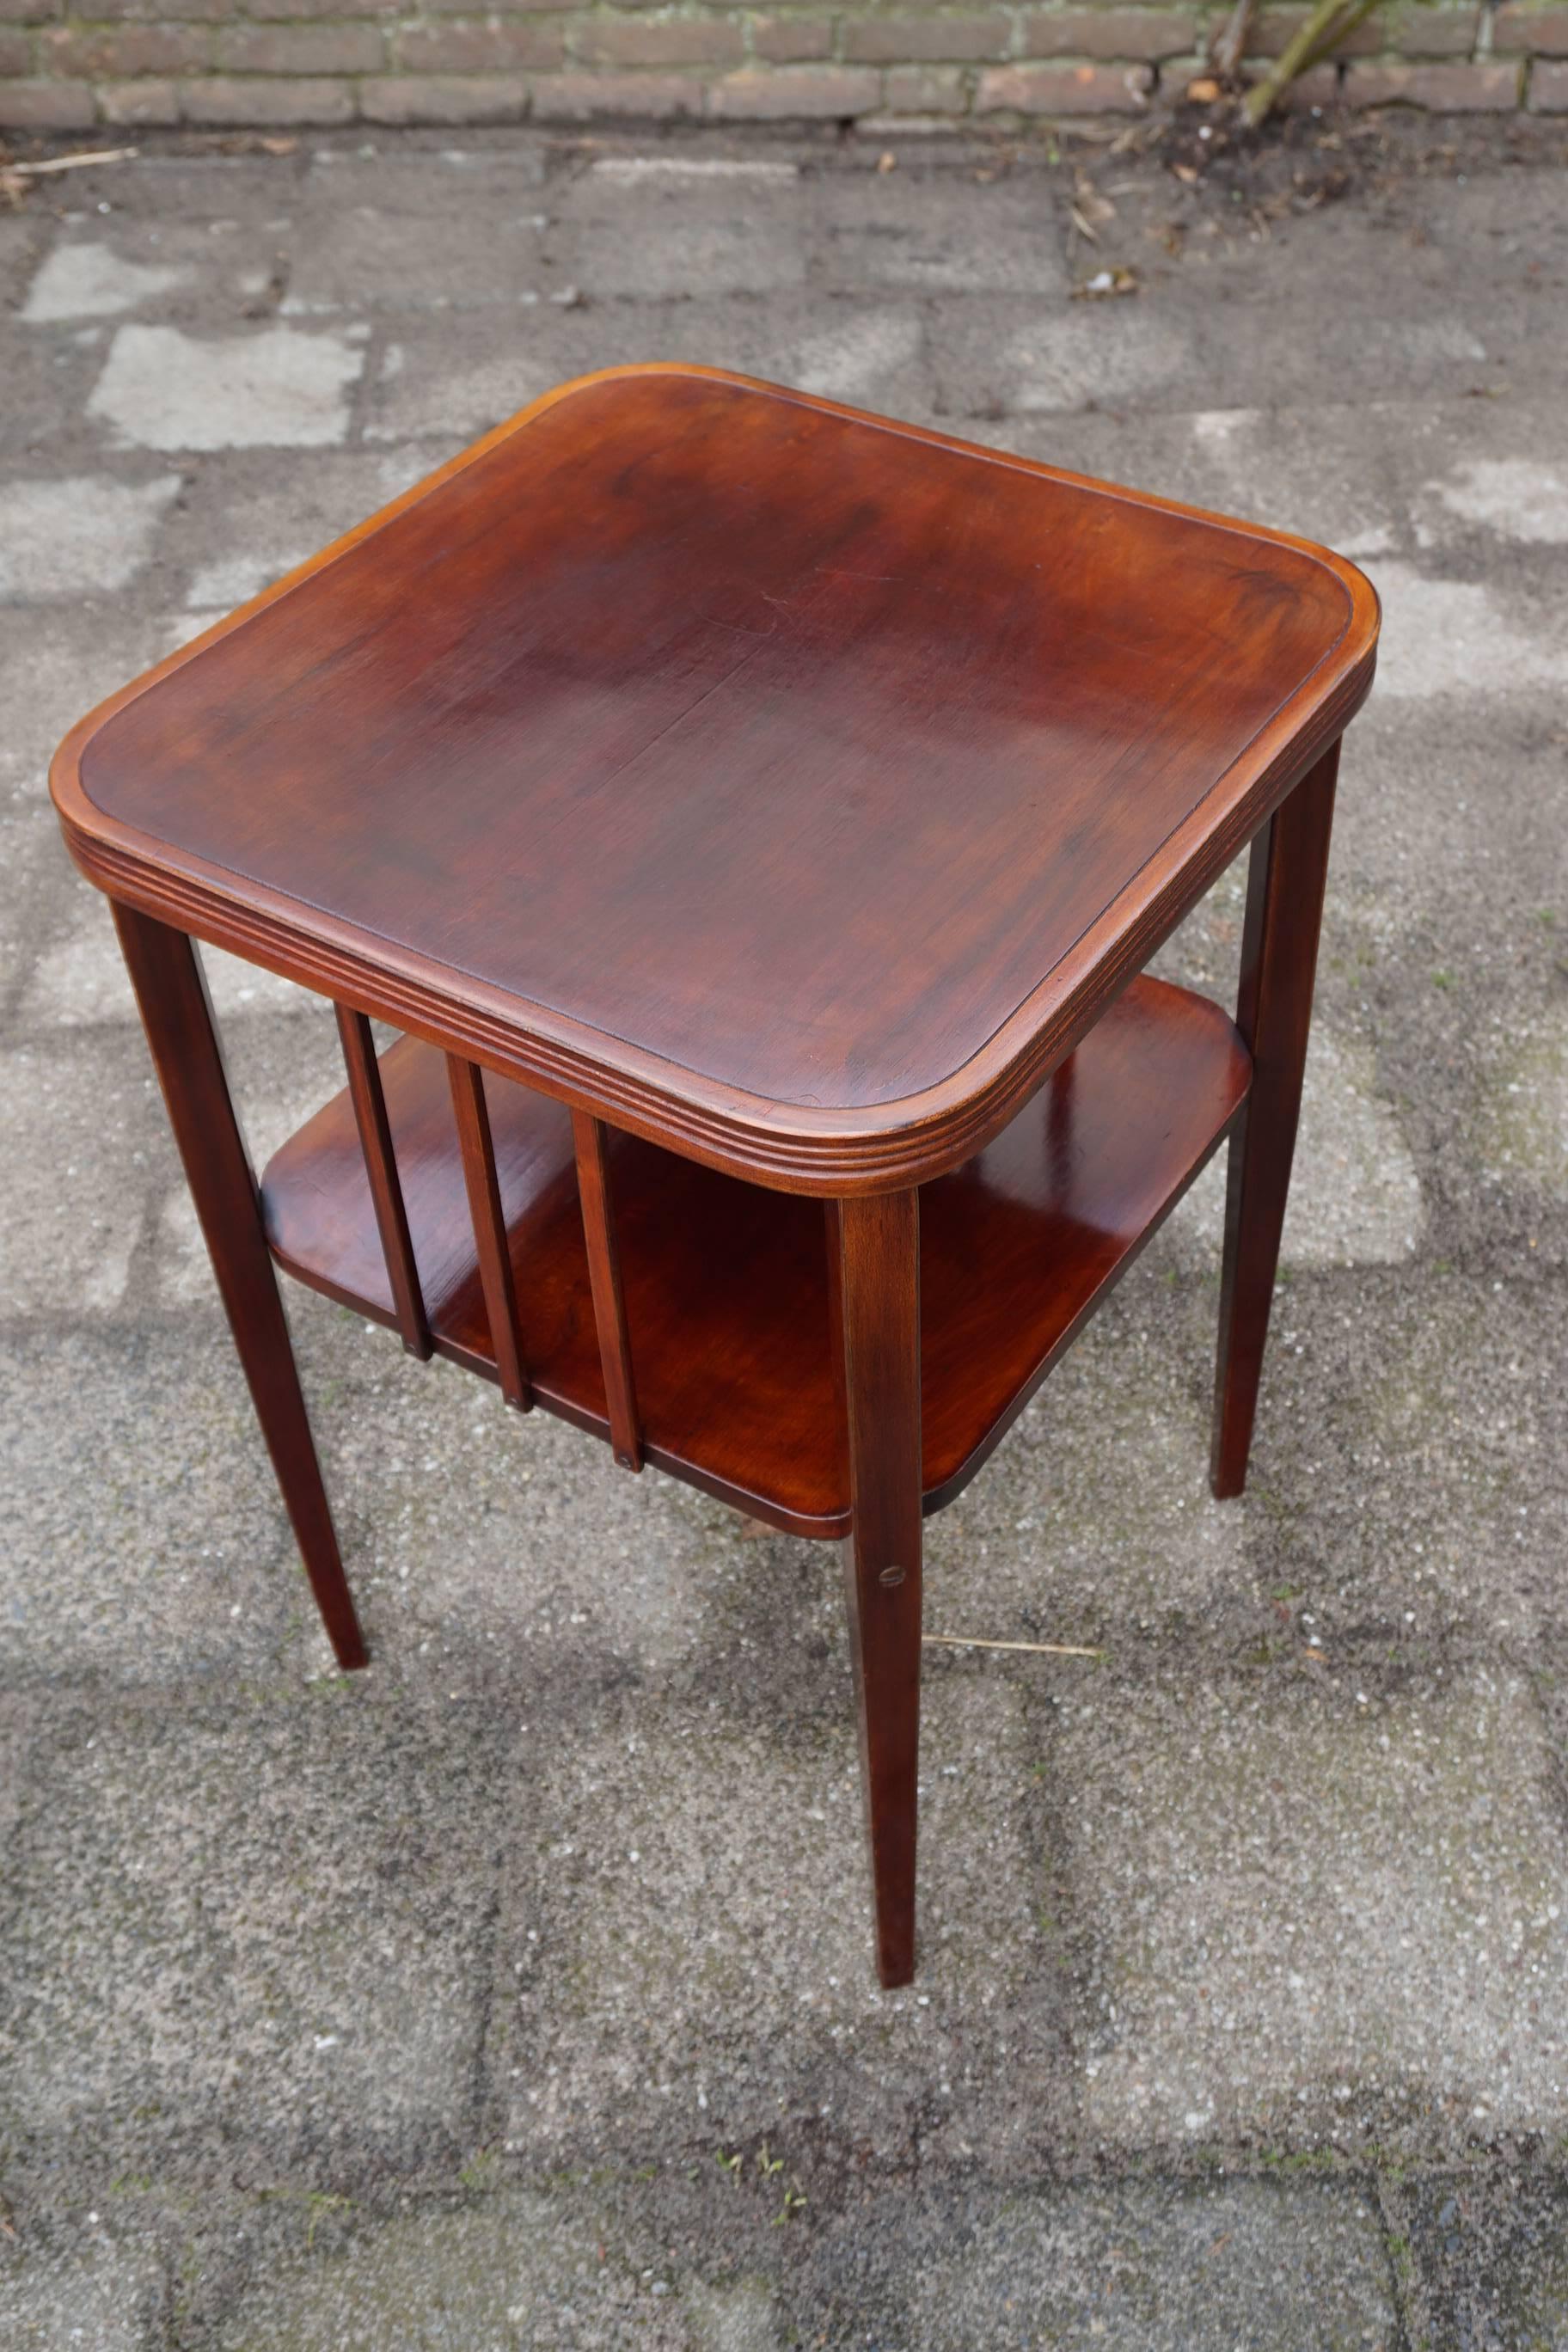 Hand-Crafted Stunning Viennese Secession Coffee, Books or End Table Wonderful Shape & Patina